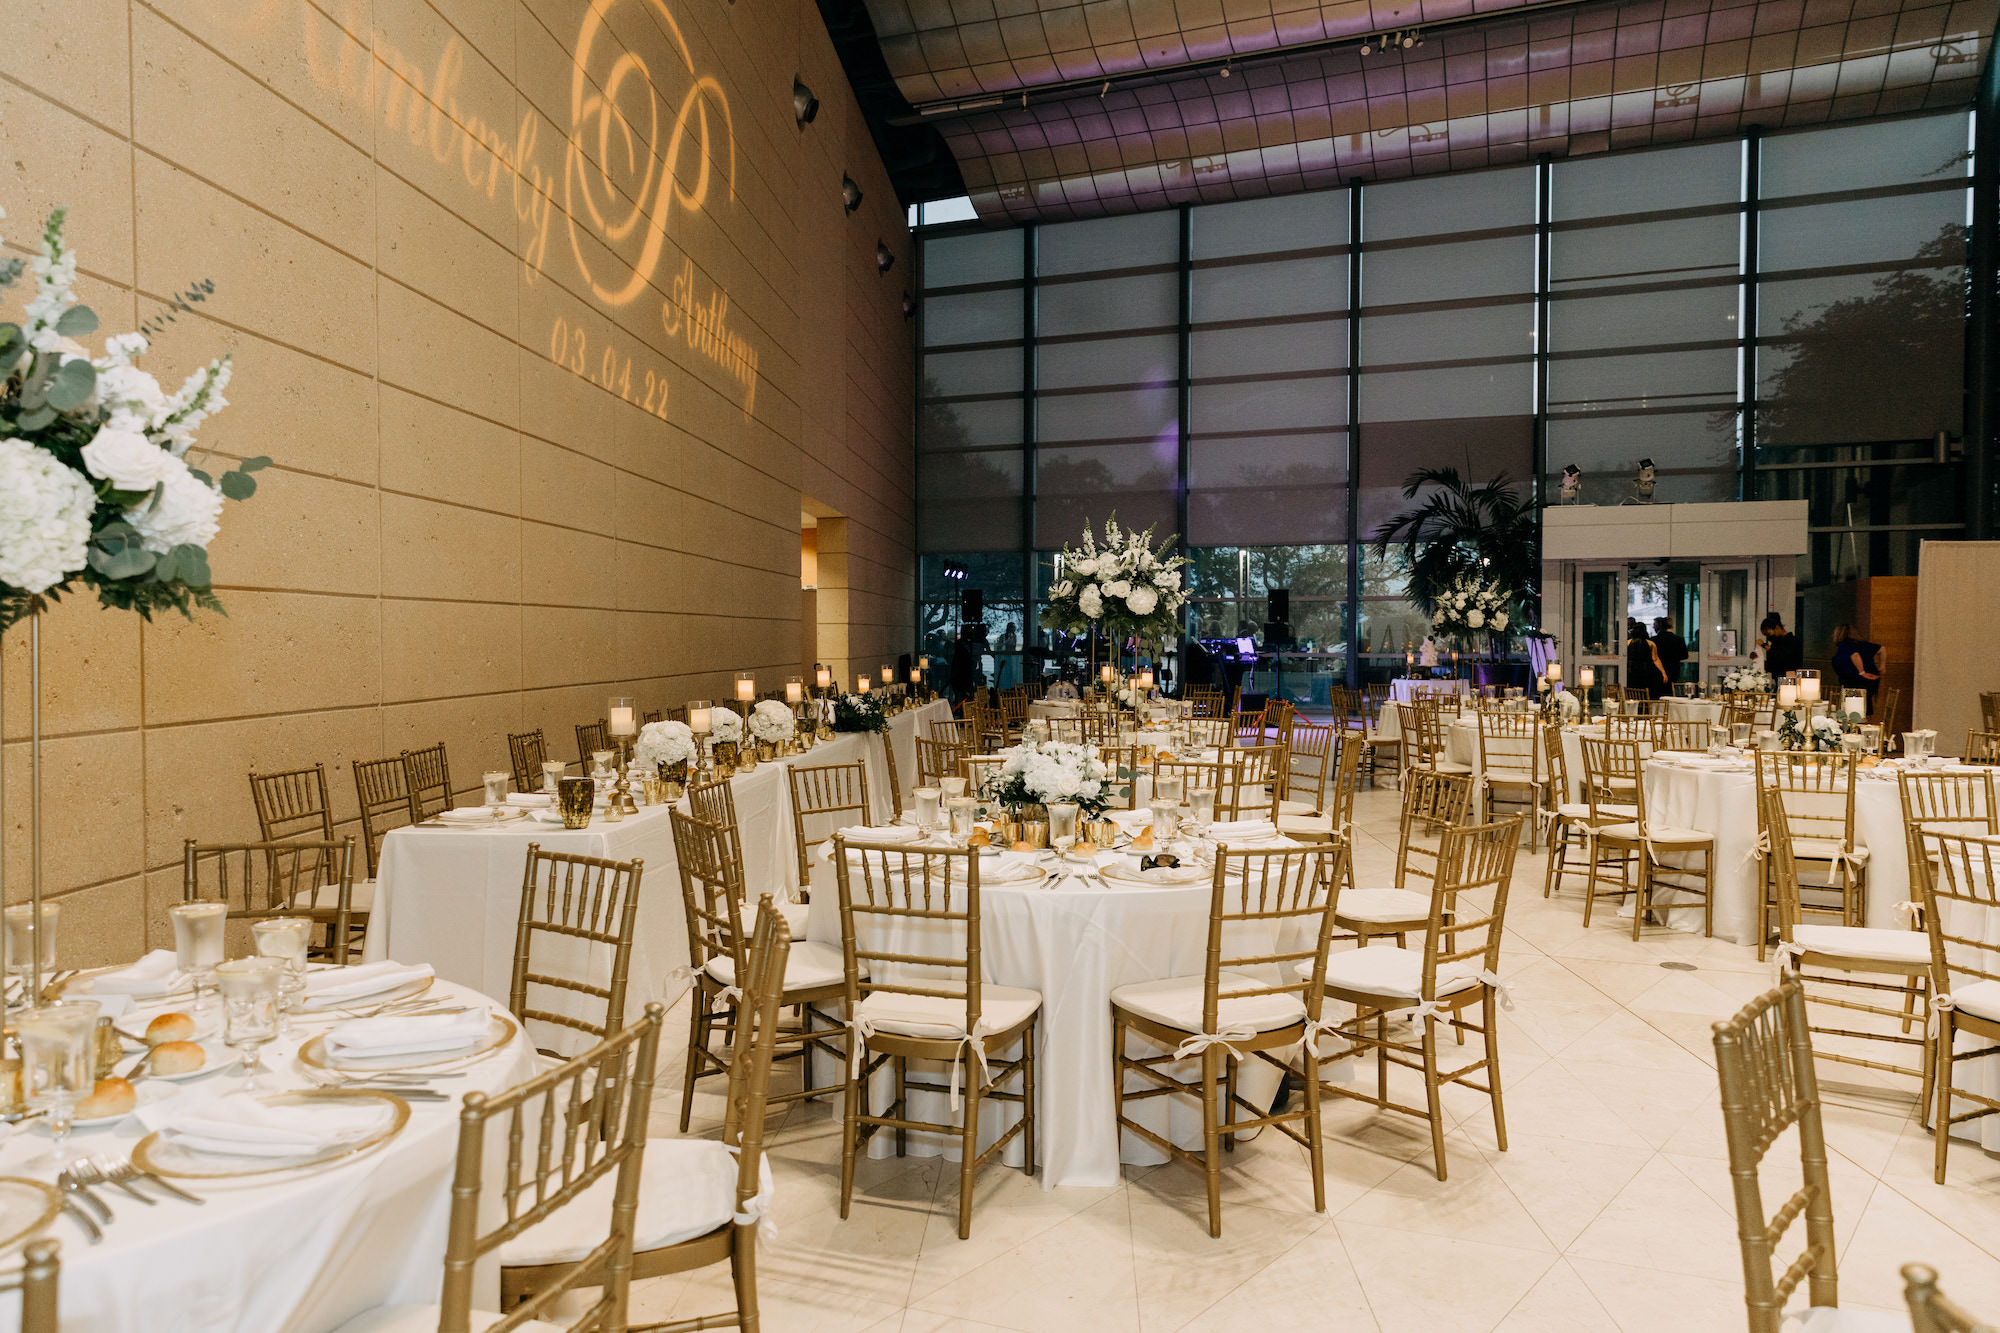 Classic White and Gold Wedding Reception Ideas | Downtown St. Pete Venue Museum of Fine Art